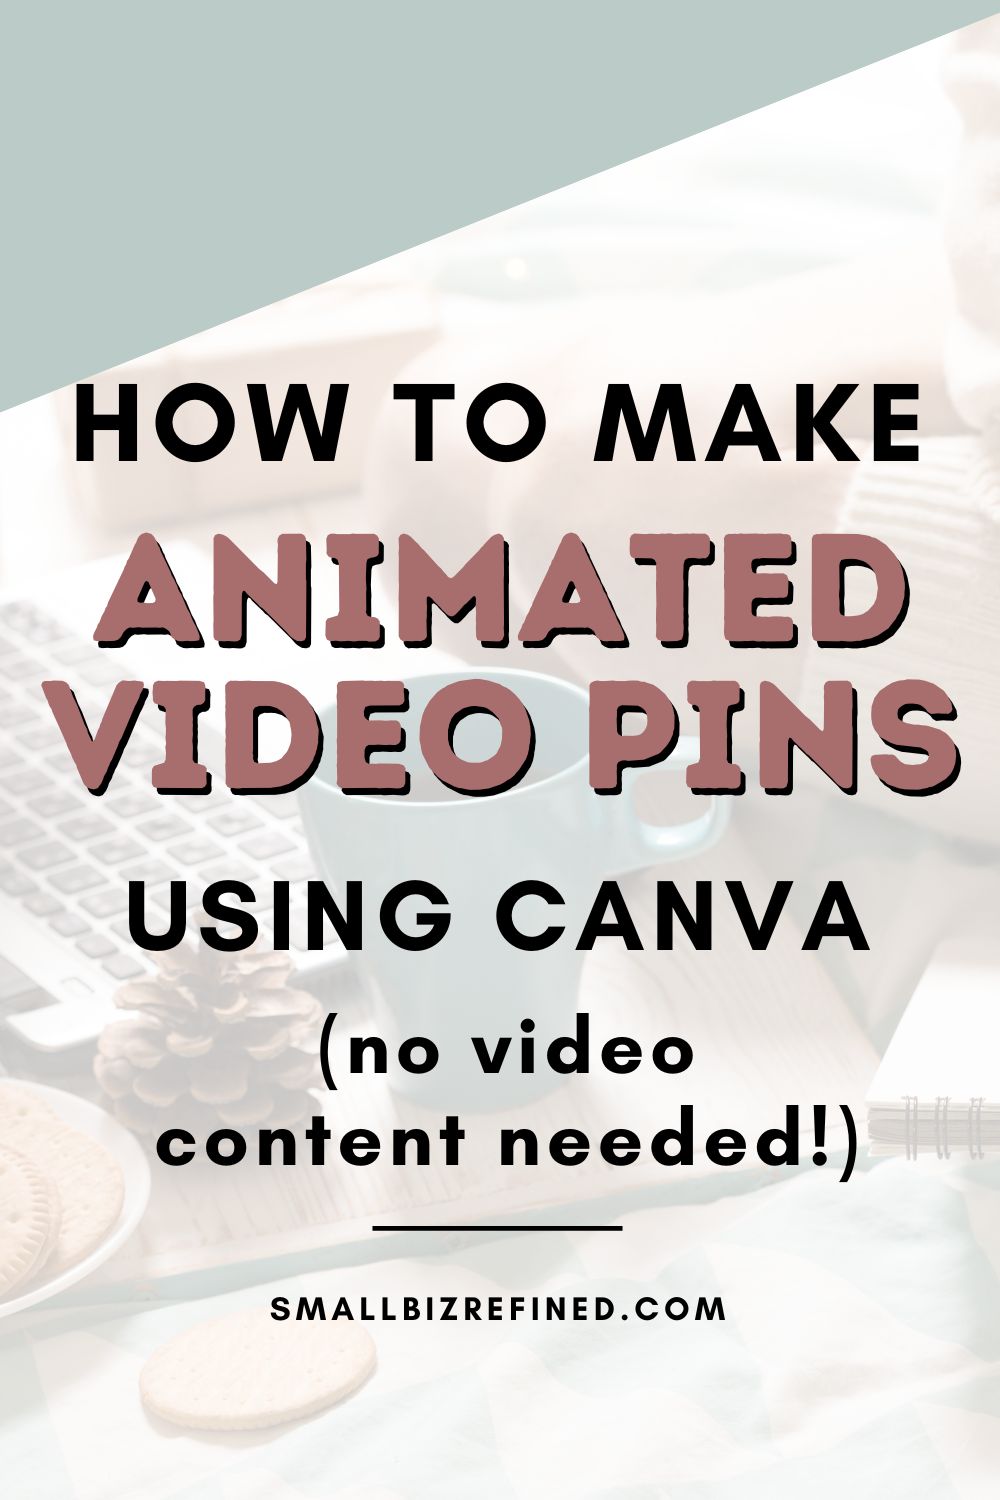 A faded image graphic with text overlay that says how to make animated video pins in Canva.